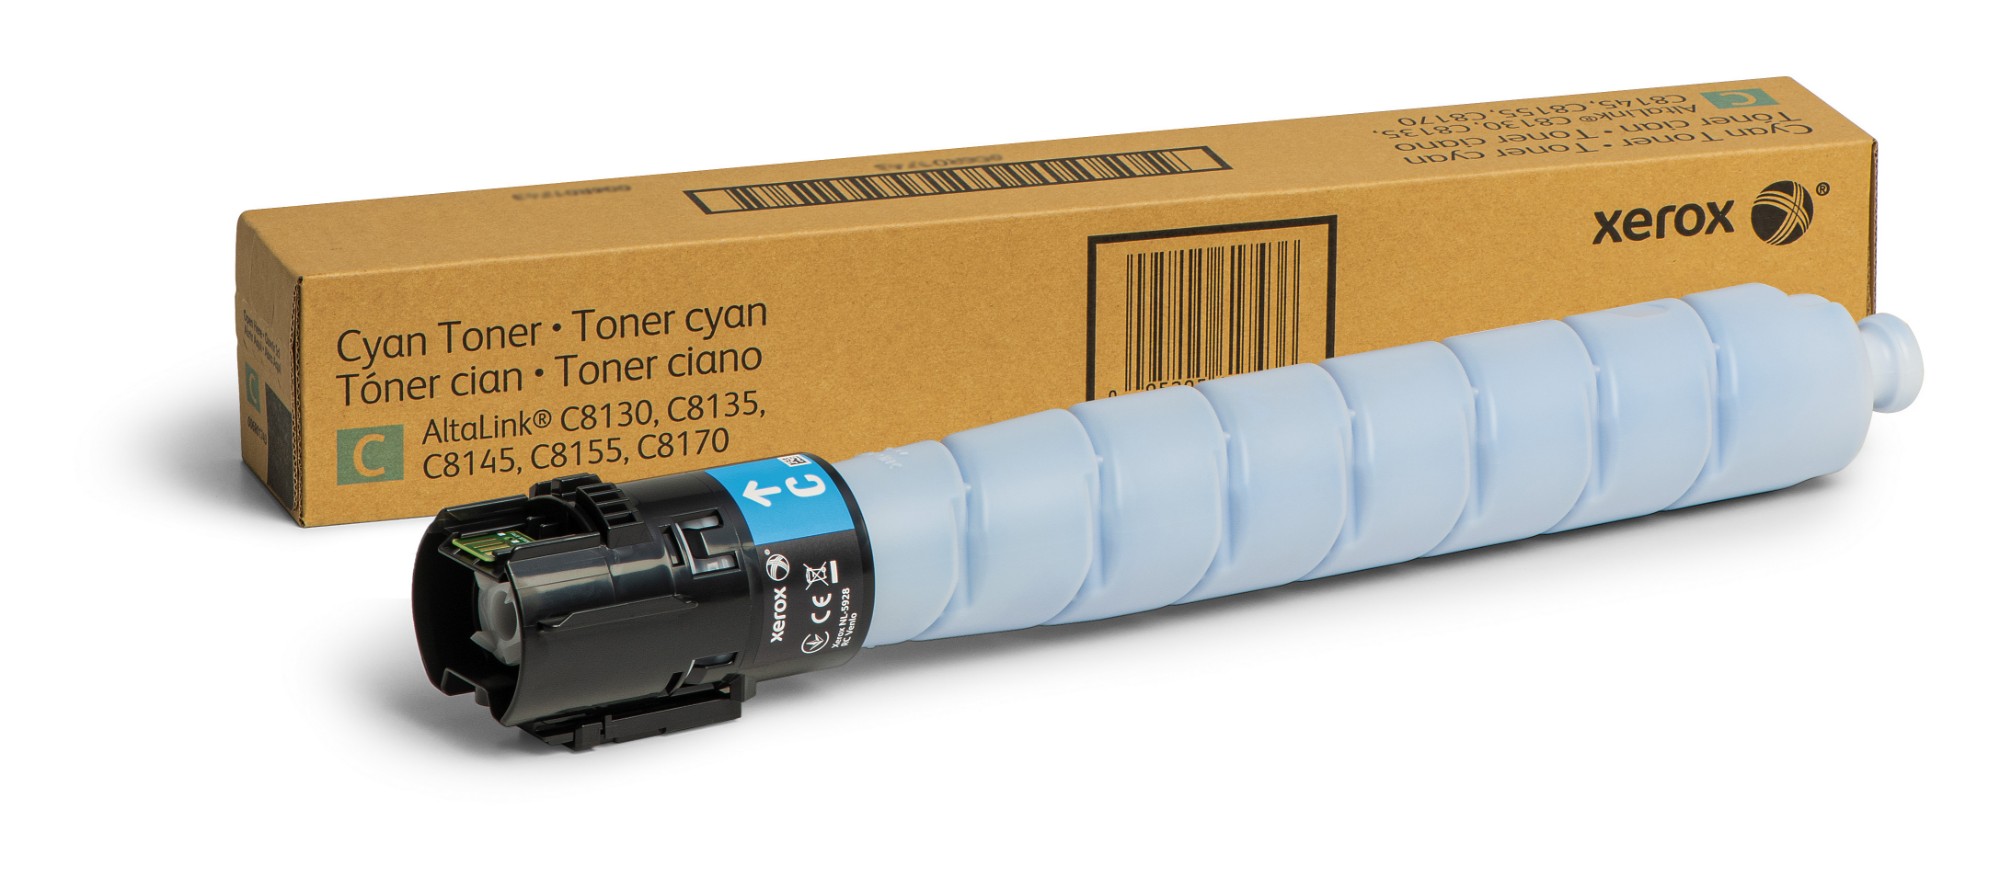 Photos - Ink & Toner Cartridge Xerox 006R01747 Toner cyan, 21K pages ISO/IEC 19752 for  AltaLink 